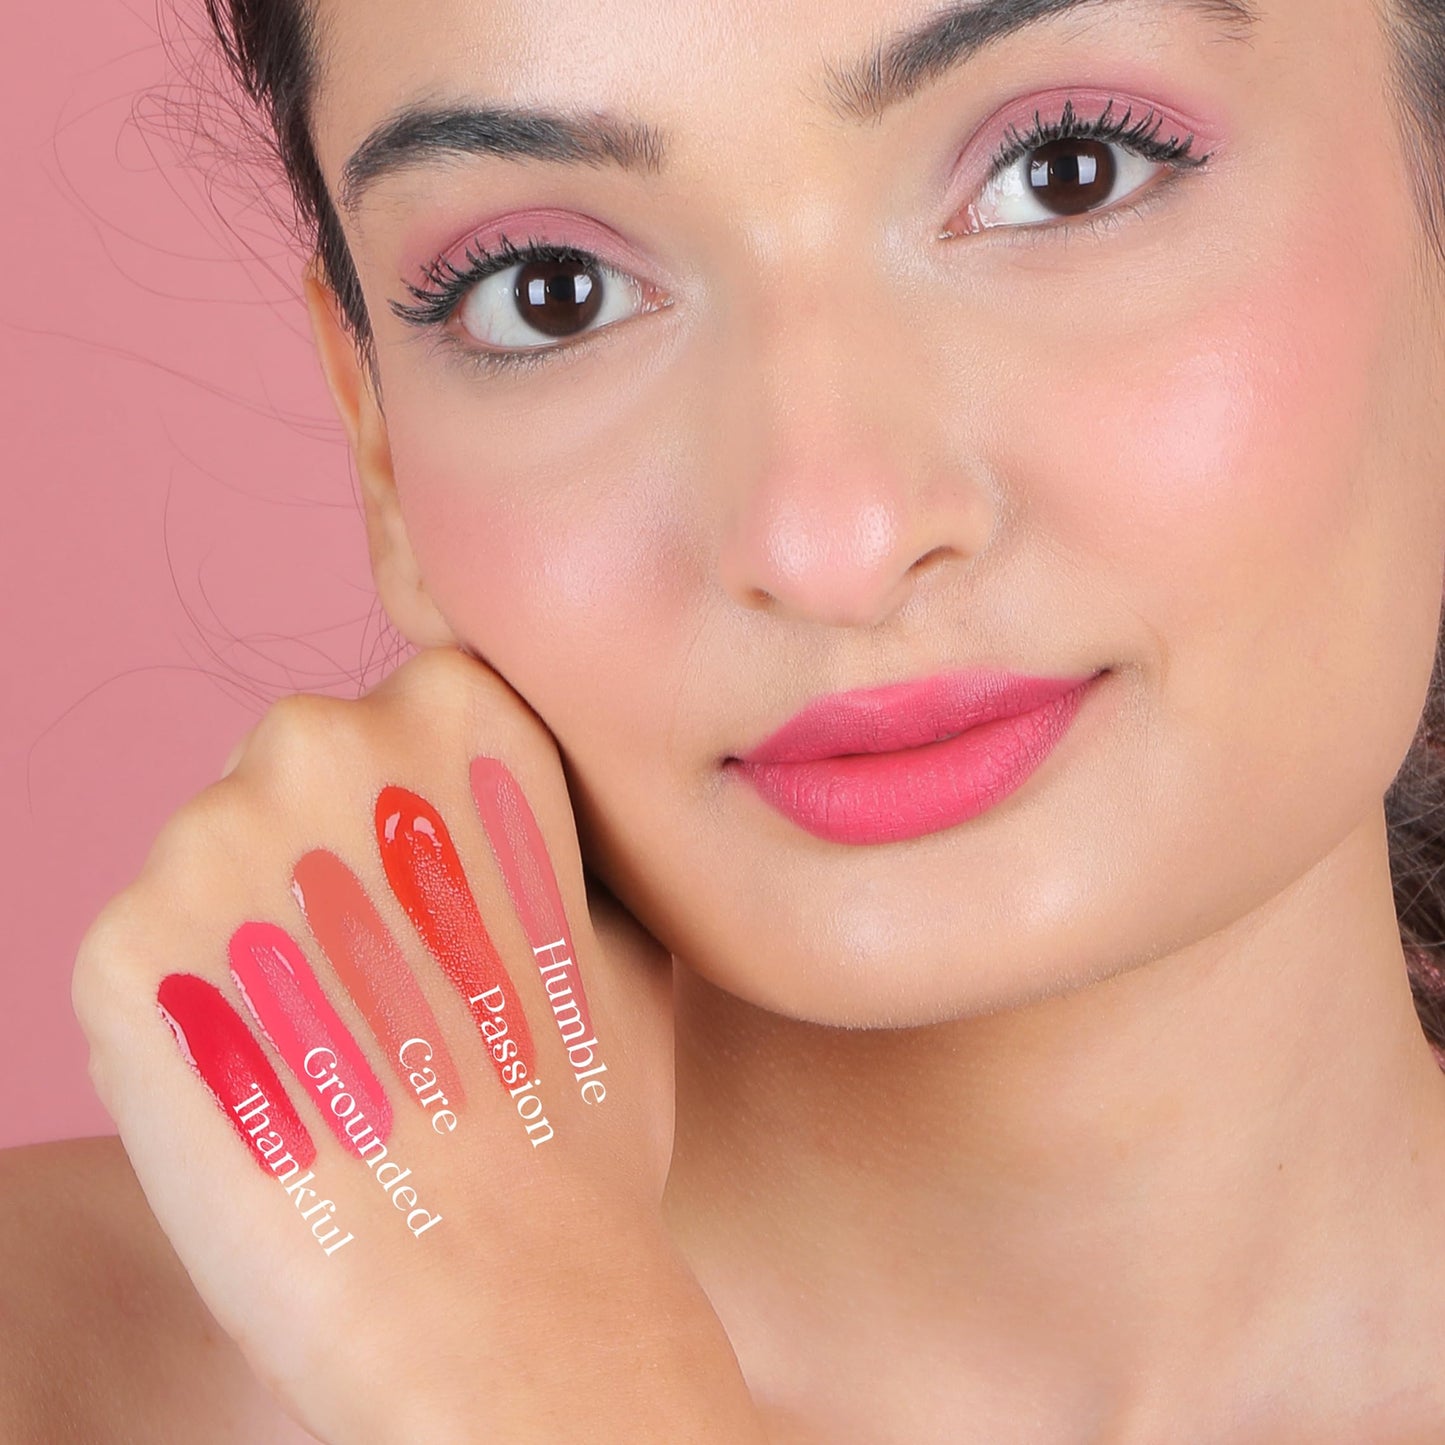 LA MIOR Here To Stay Liquid Blush | Radiant & Satin Finish | 3 in 1 Colour for Cheeks, Lips & Eyes Tint | Long Lasting Natural Glow | Pigmented & Buildable | Enriched with Almond Oil, Jojoba & squalane | Shade - Humble, 5 ML